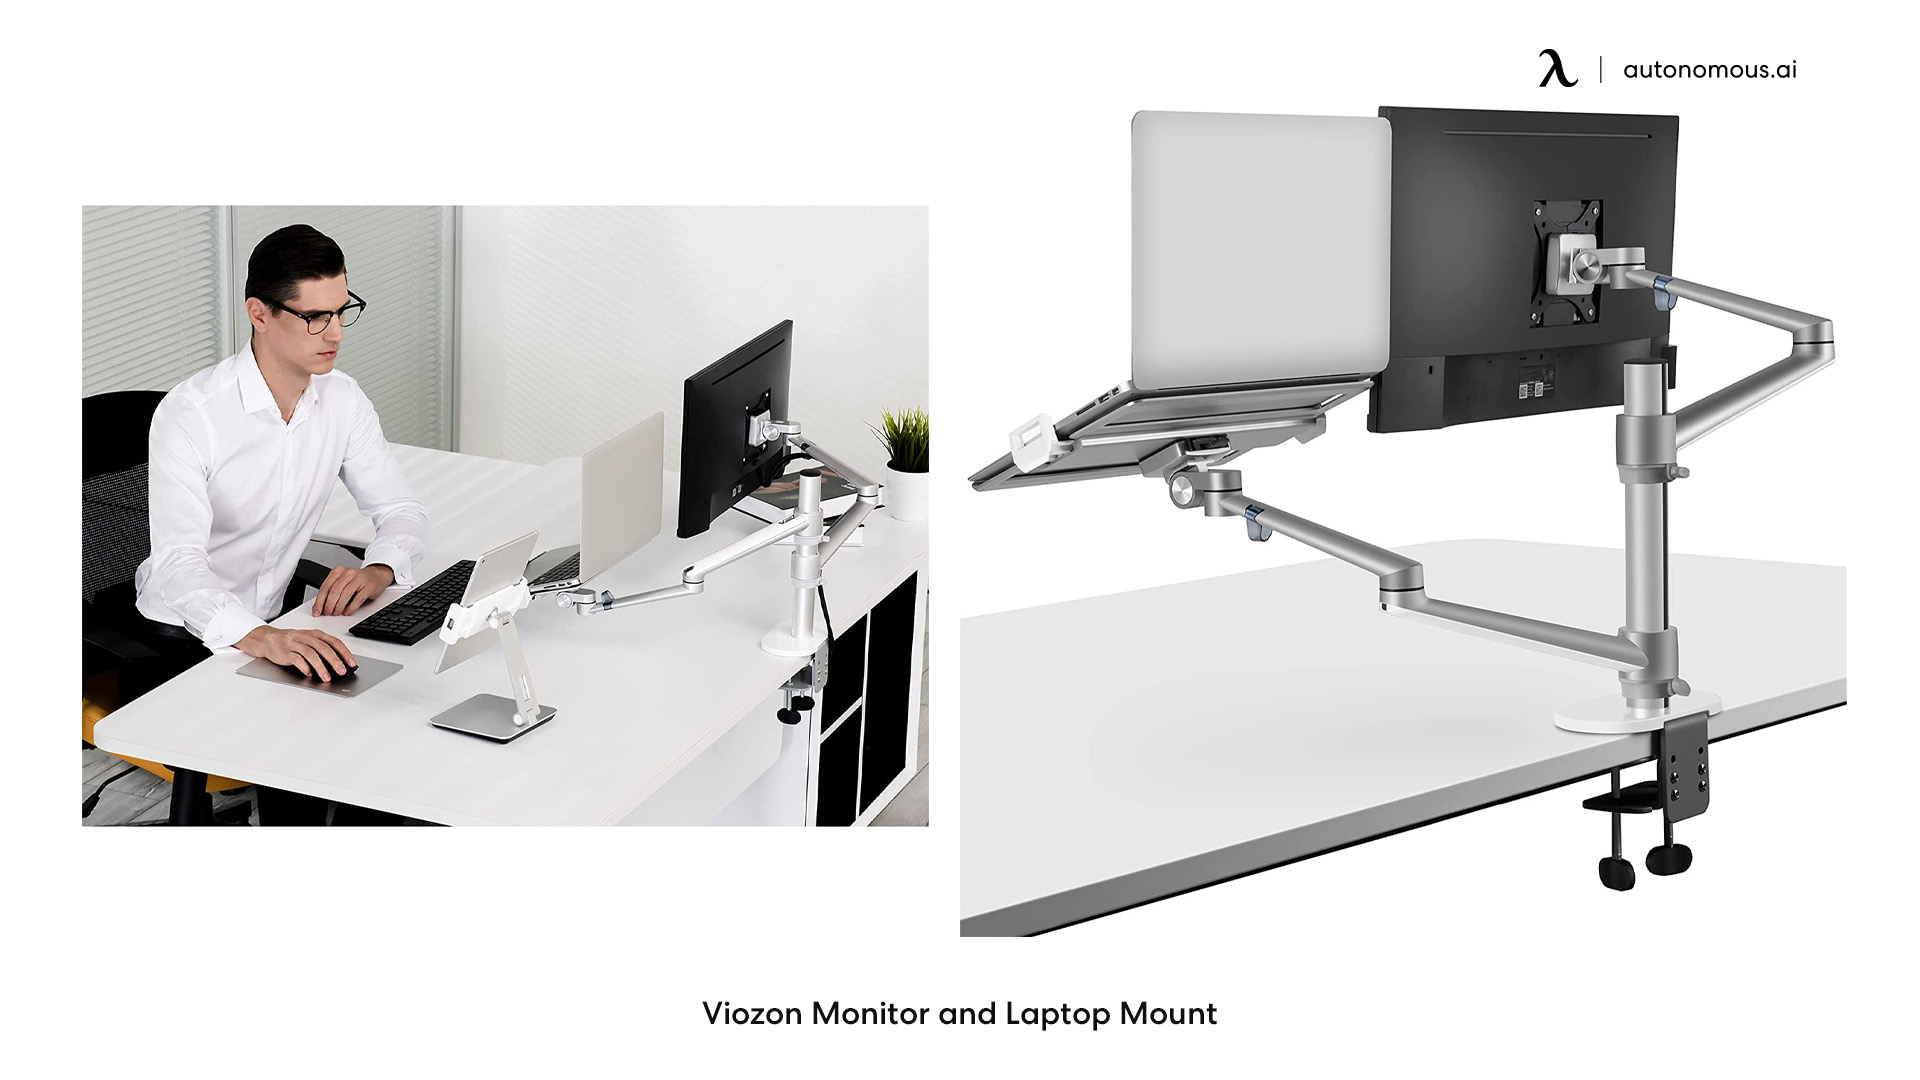 Viozon laptop and monitor stand